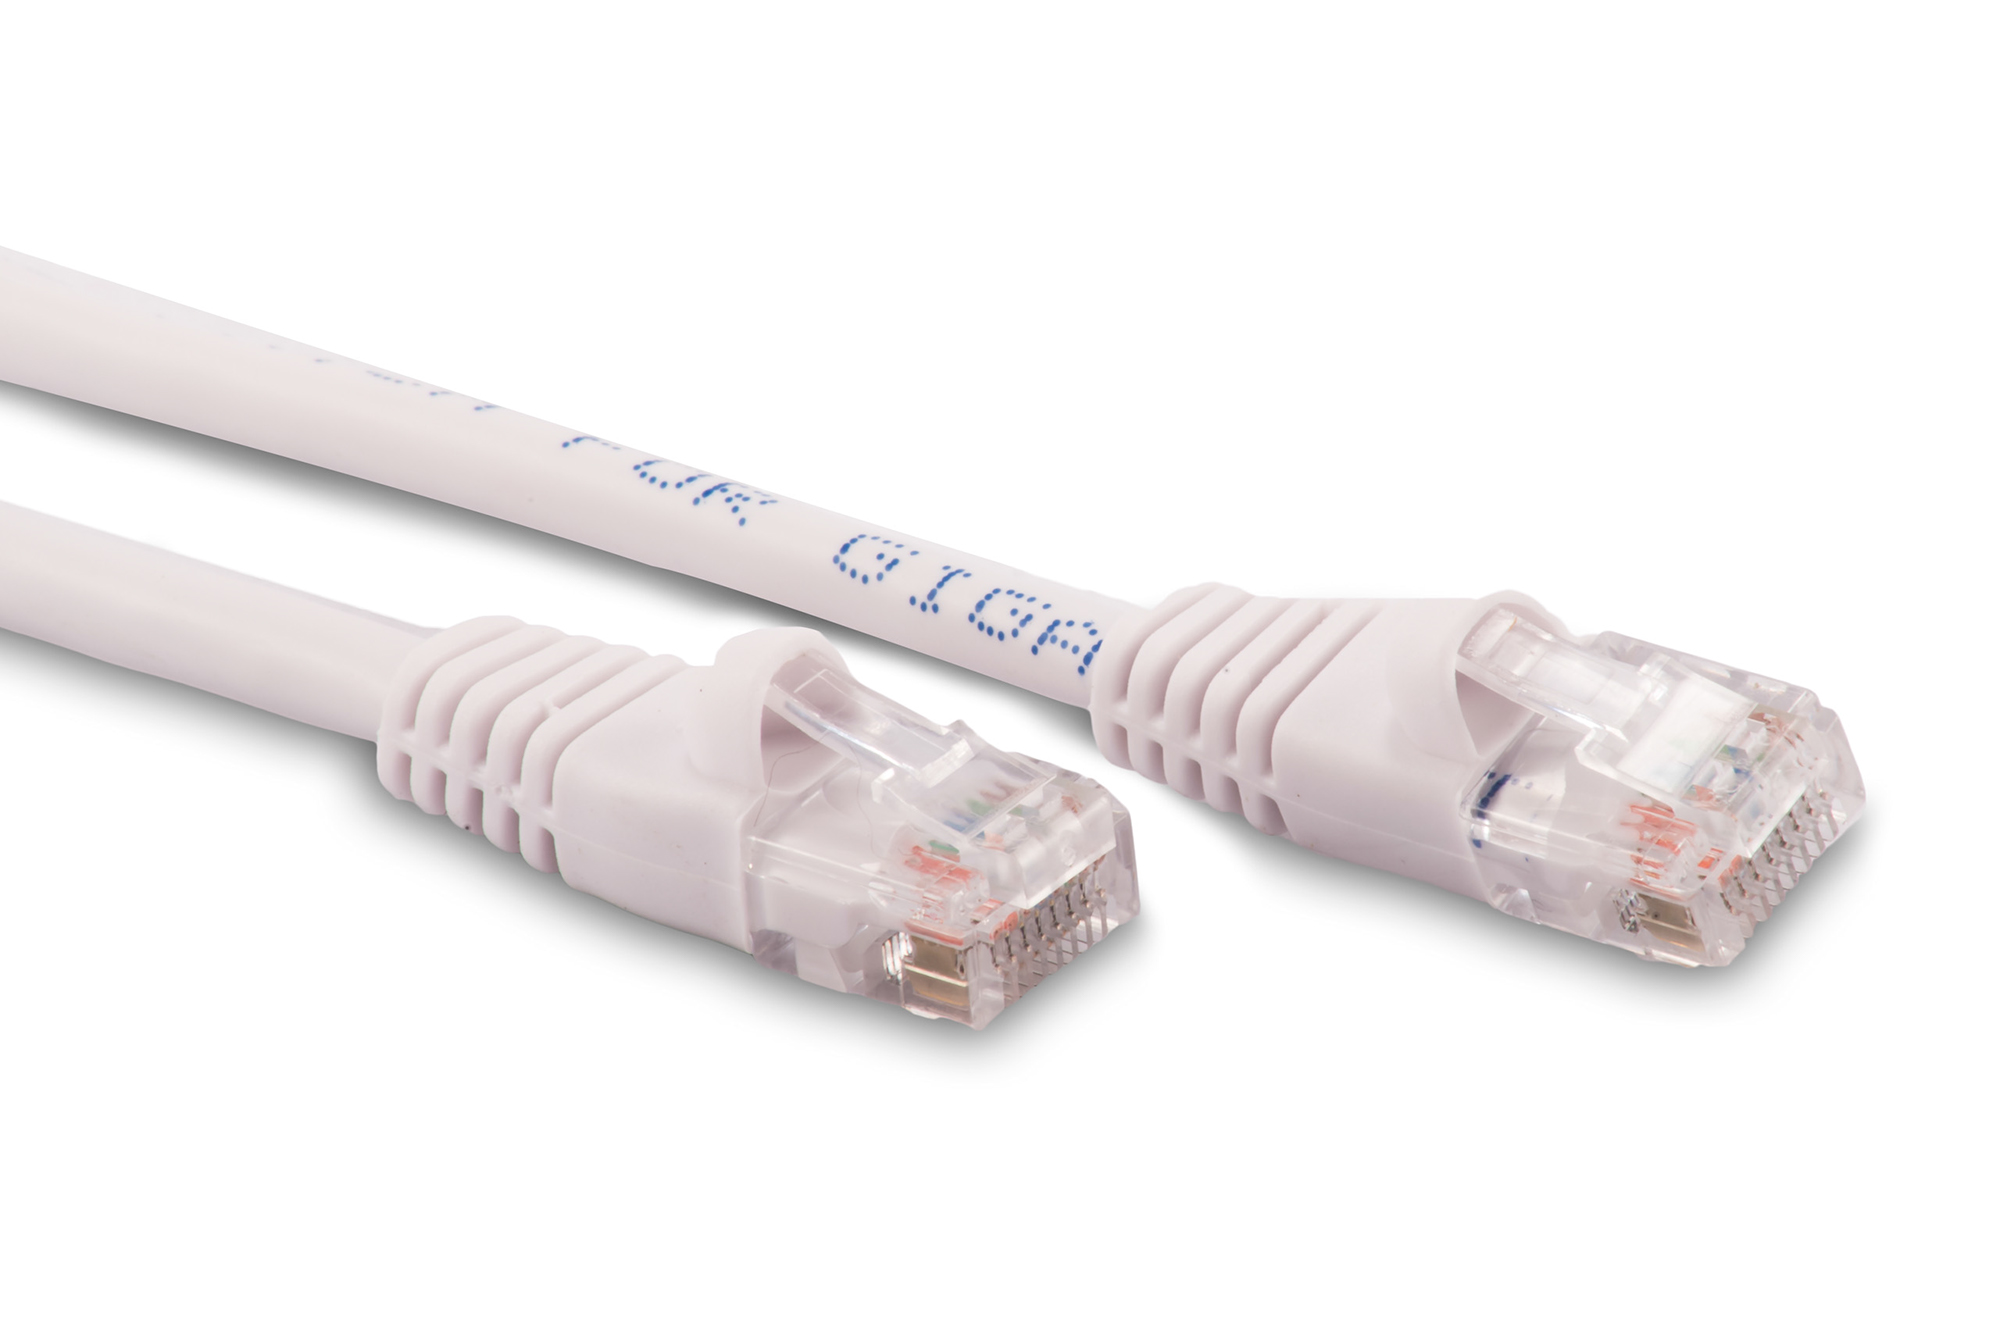 6FT Cat6 Ethernet Patch Cable - White Color - Snagless Boot